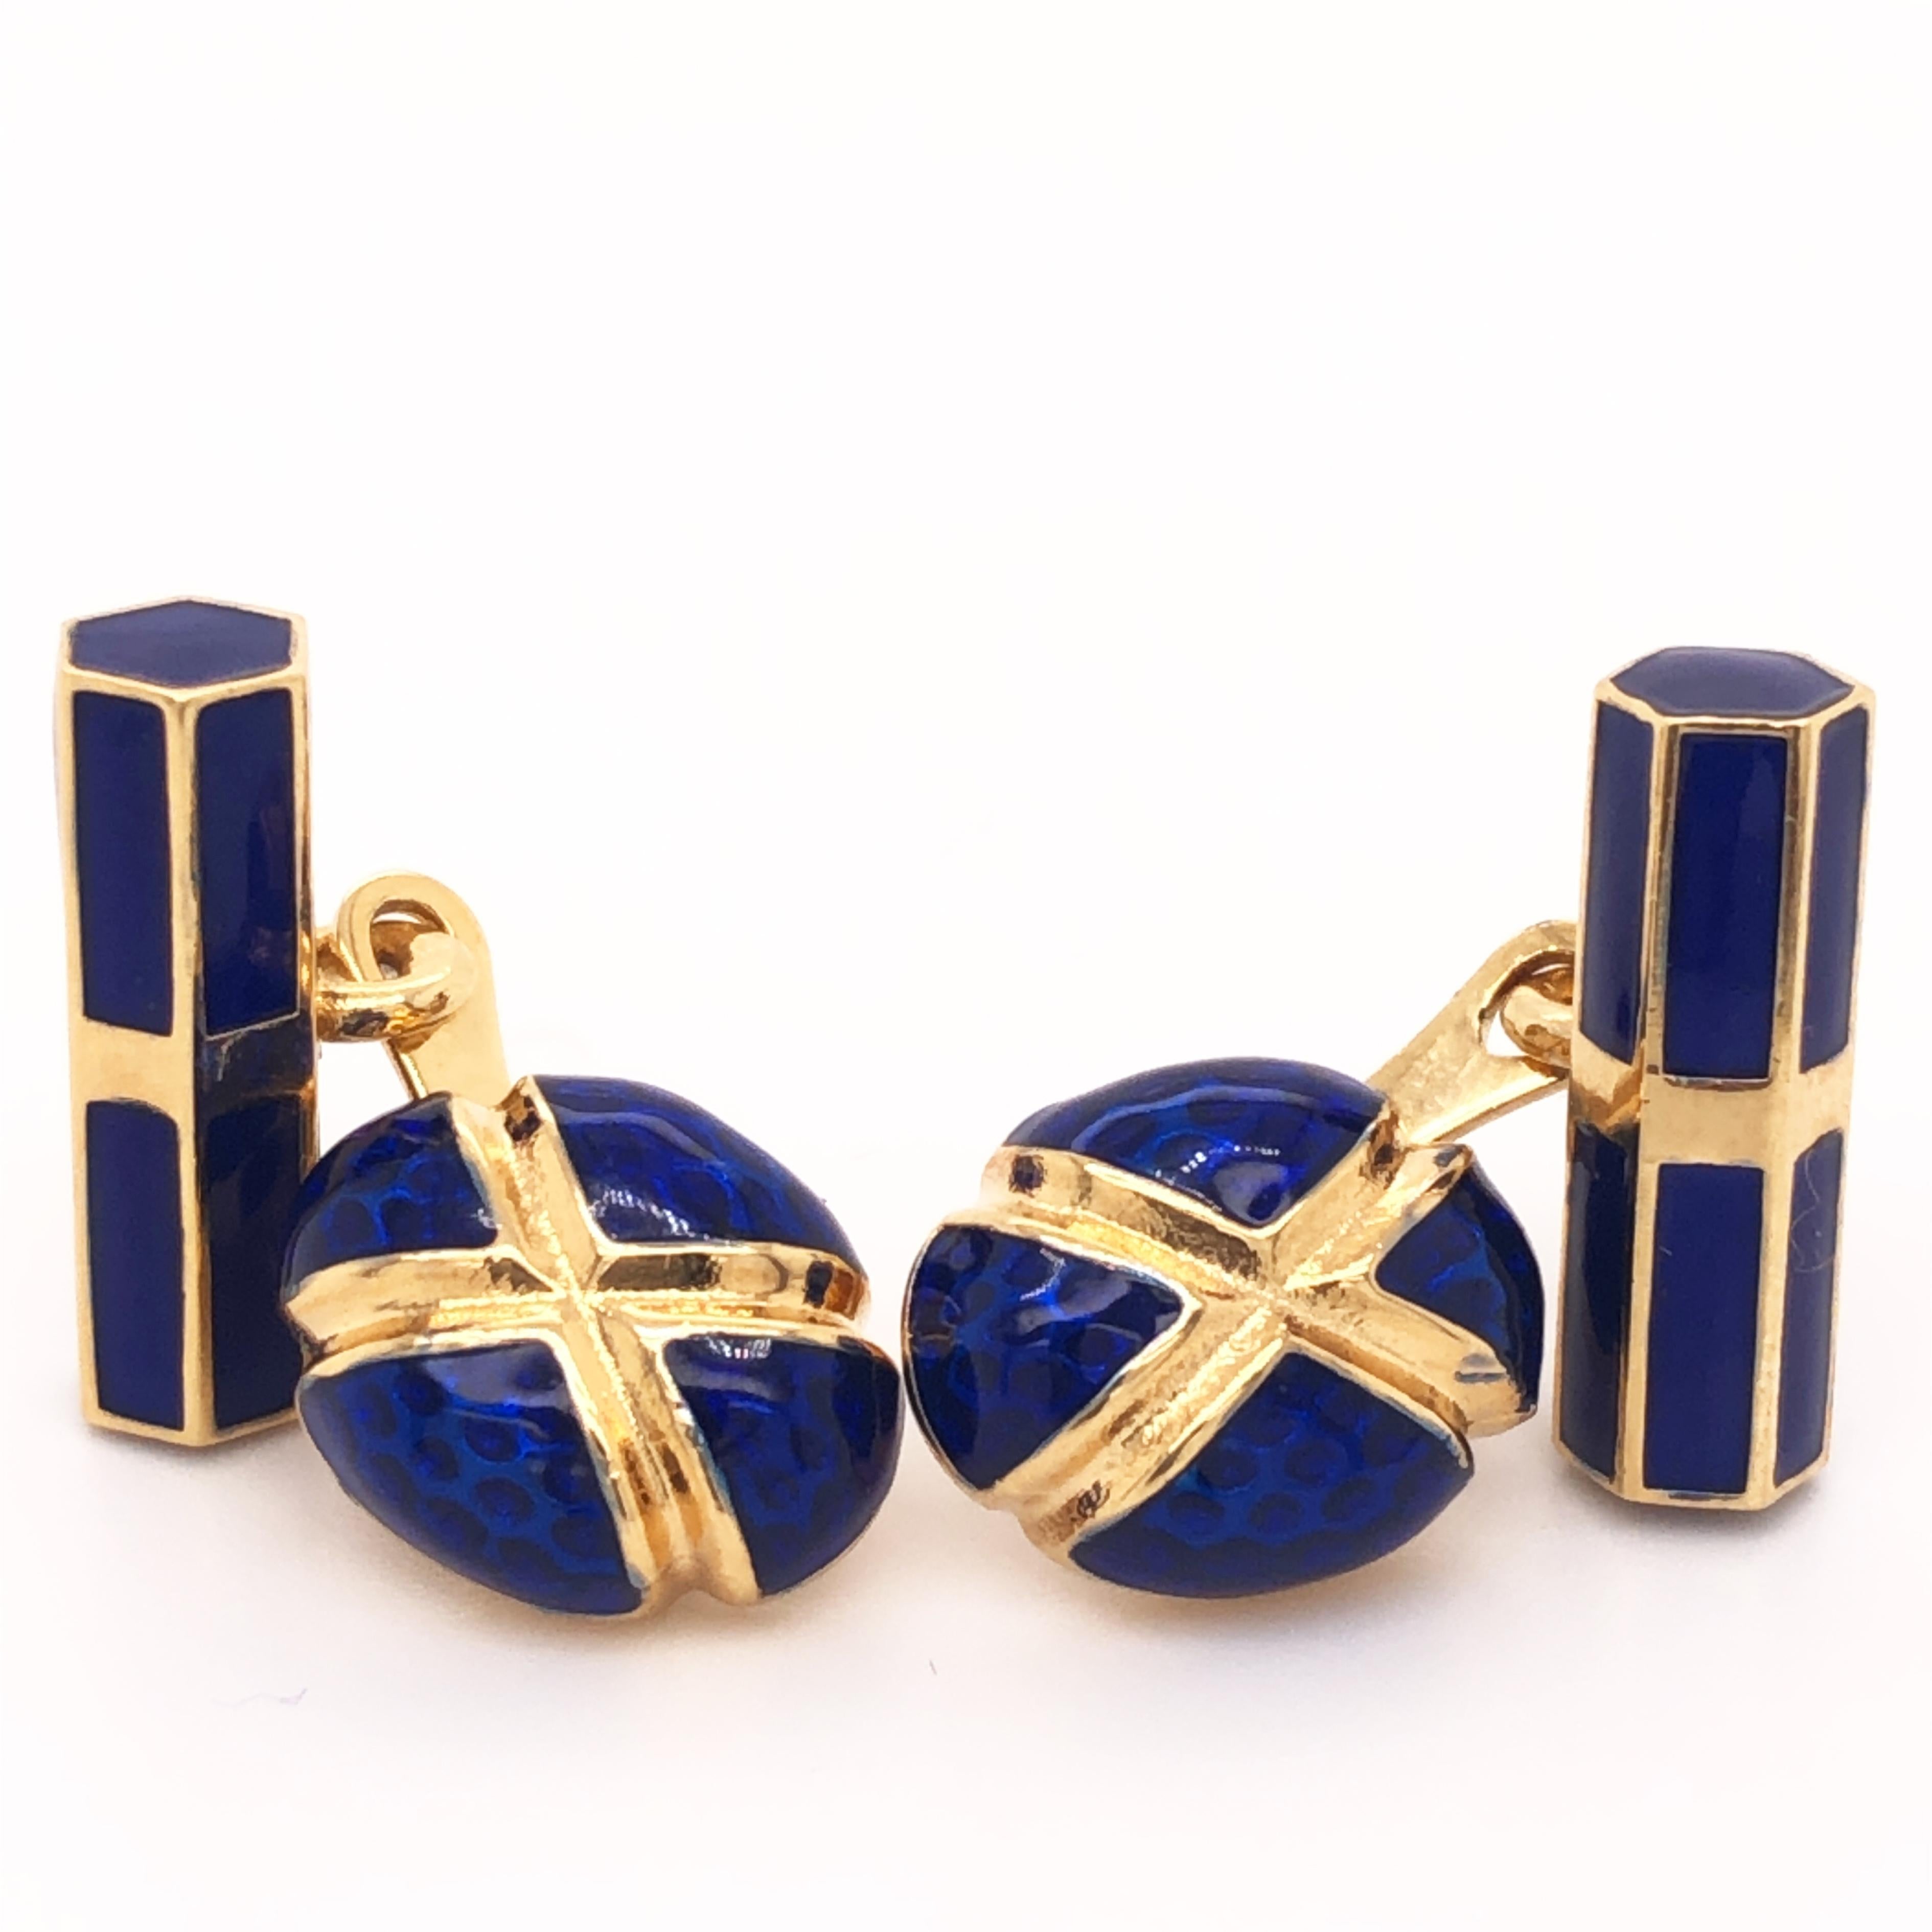 Chic and Timeless Navy Blue Hand Enameled Egg Shaped Gold Plated Sterling Silver Cufflinks.
In our smart Black Box and Pouch.
We are pleased to offer complimentary express shipping to the US.